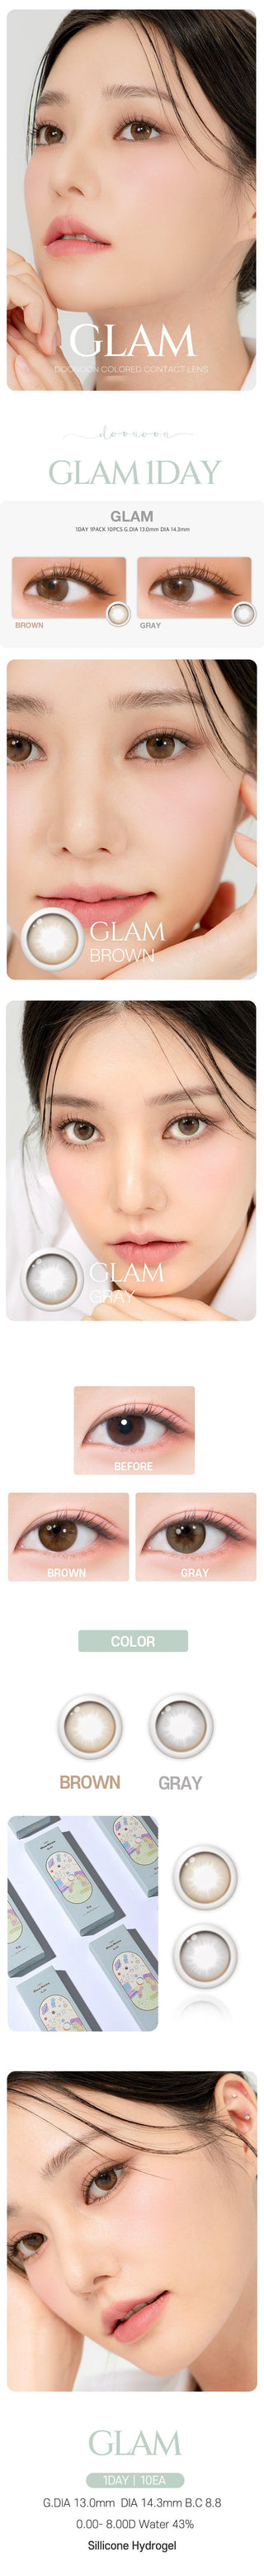 Variety of DooNoon Glam 1-Day Grey (10pk) contact lens colors displayed, with closeups of an eye wearing the contact lens colors, and with a model wearing the contact lens colors showing realistic eye-enlarging effect from various angles.